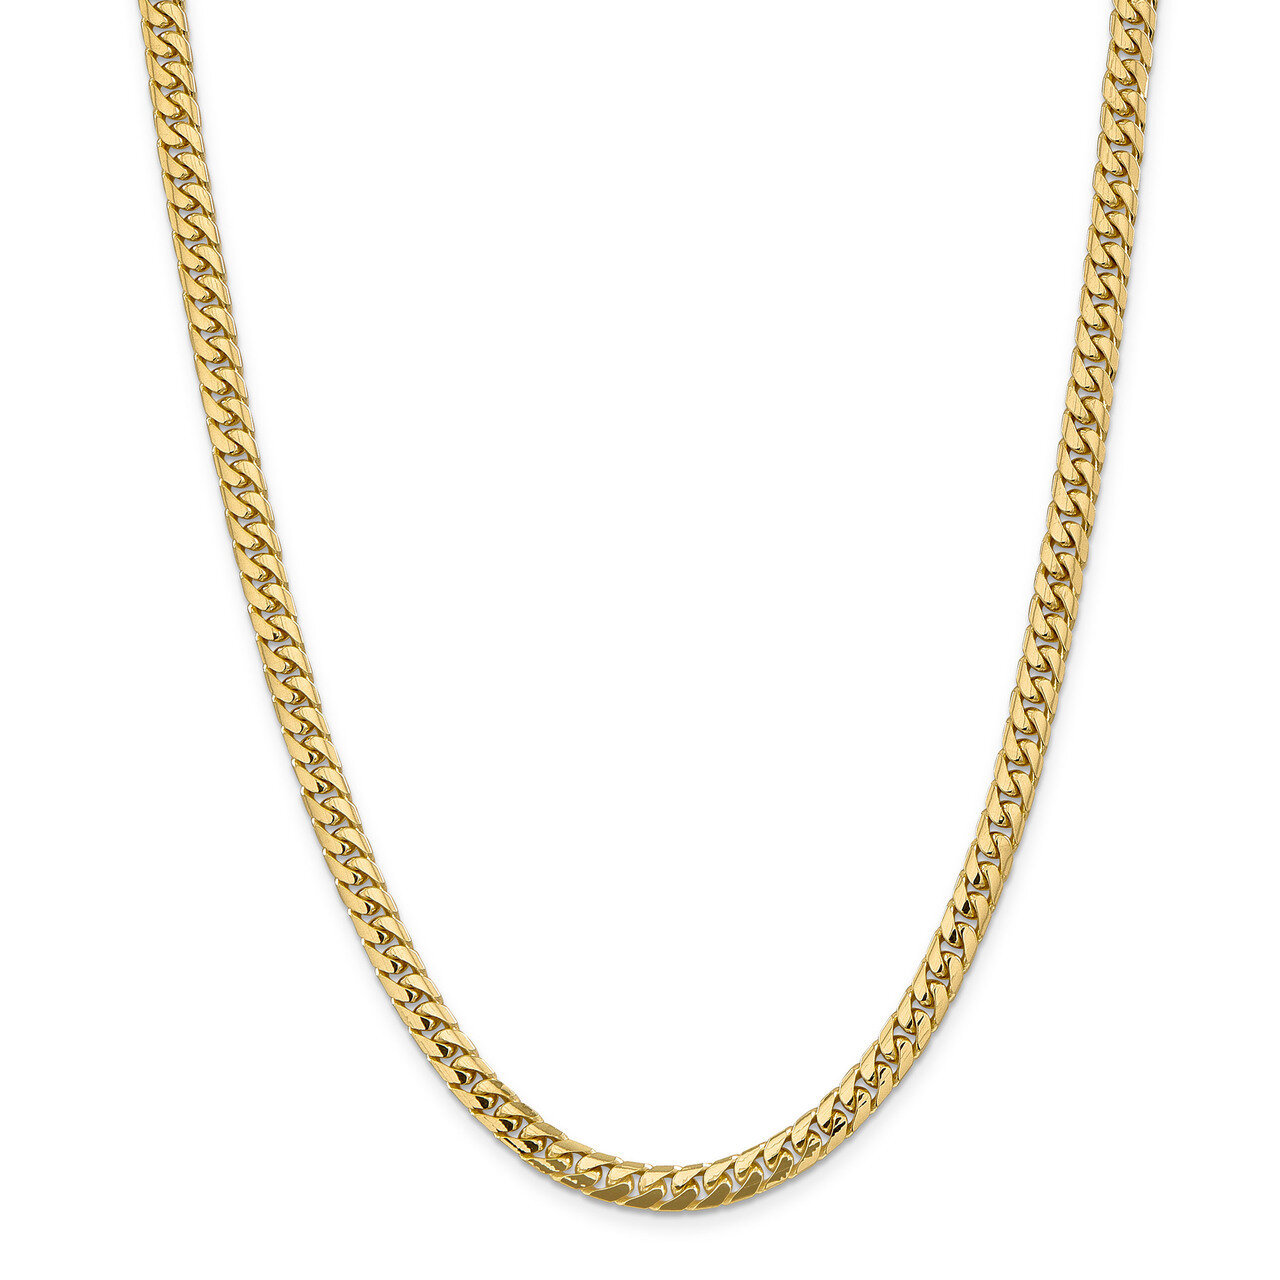 26 Inch 5.5mm Domed Curb Chain 14k Gold DCU180-26